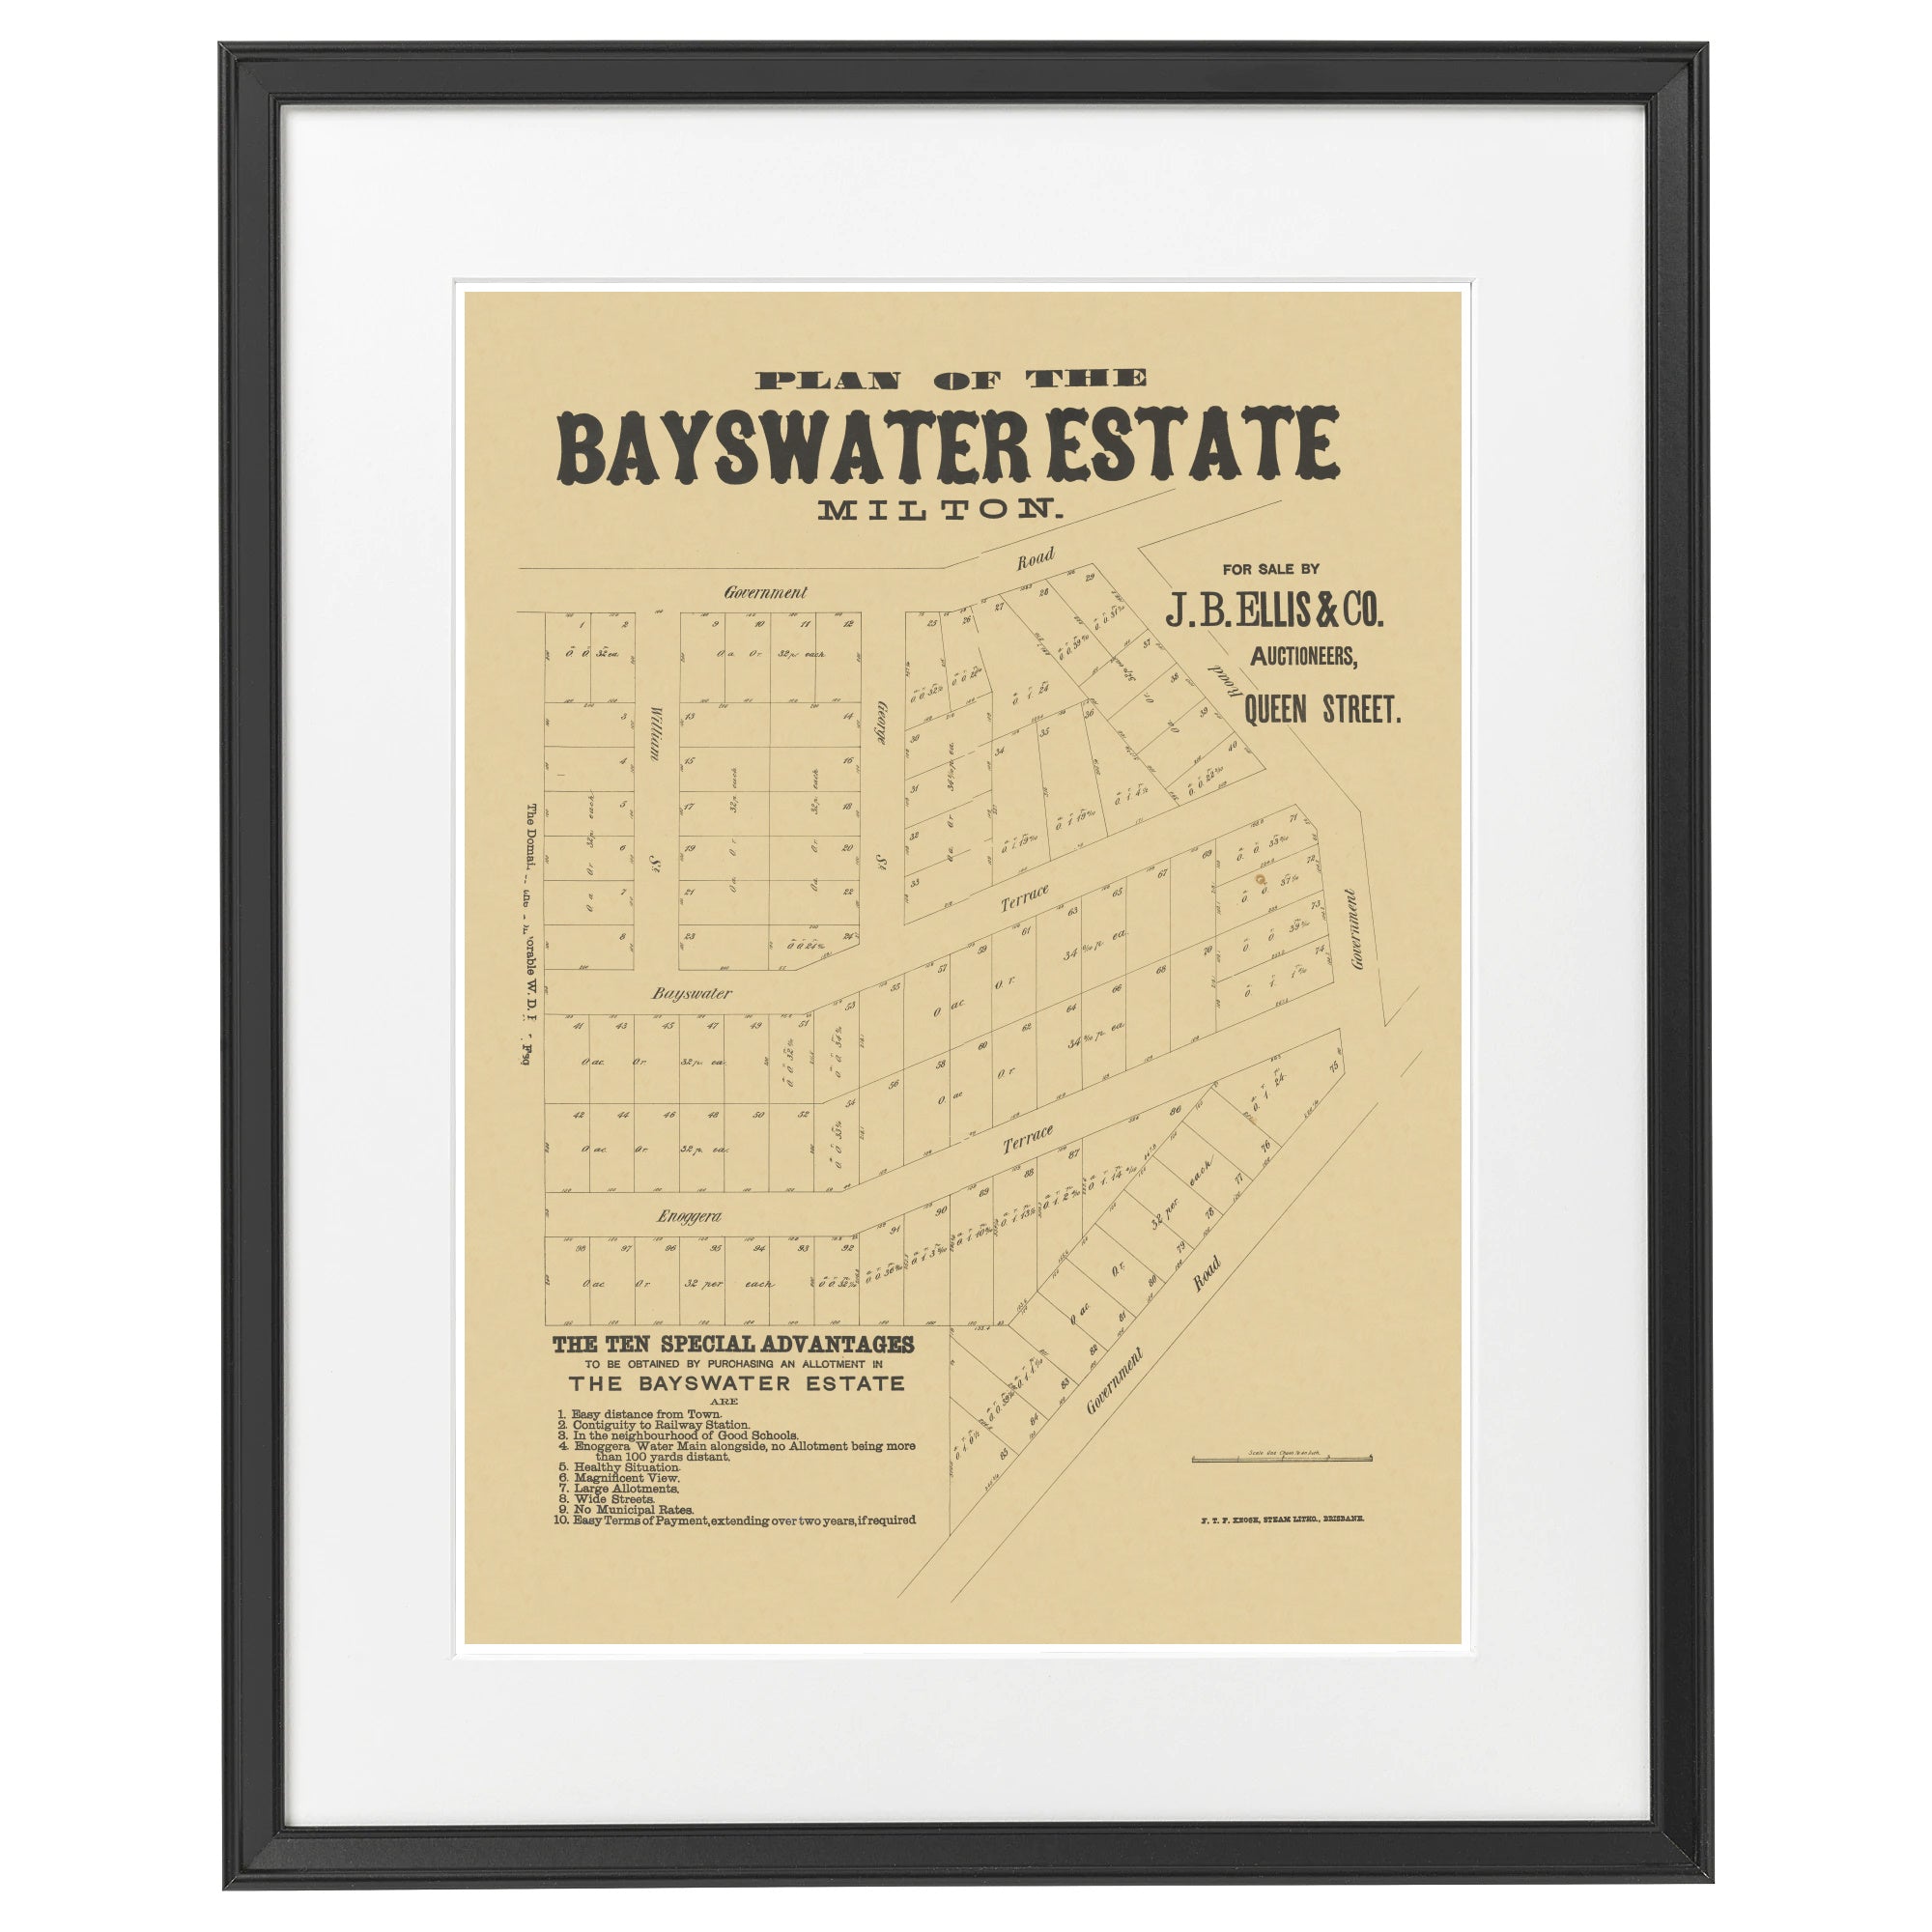 1879 Bayswater Estate - 145 years ago today